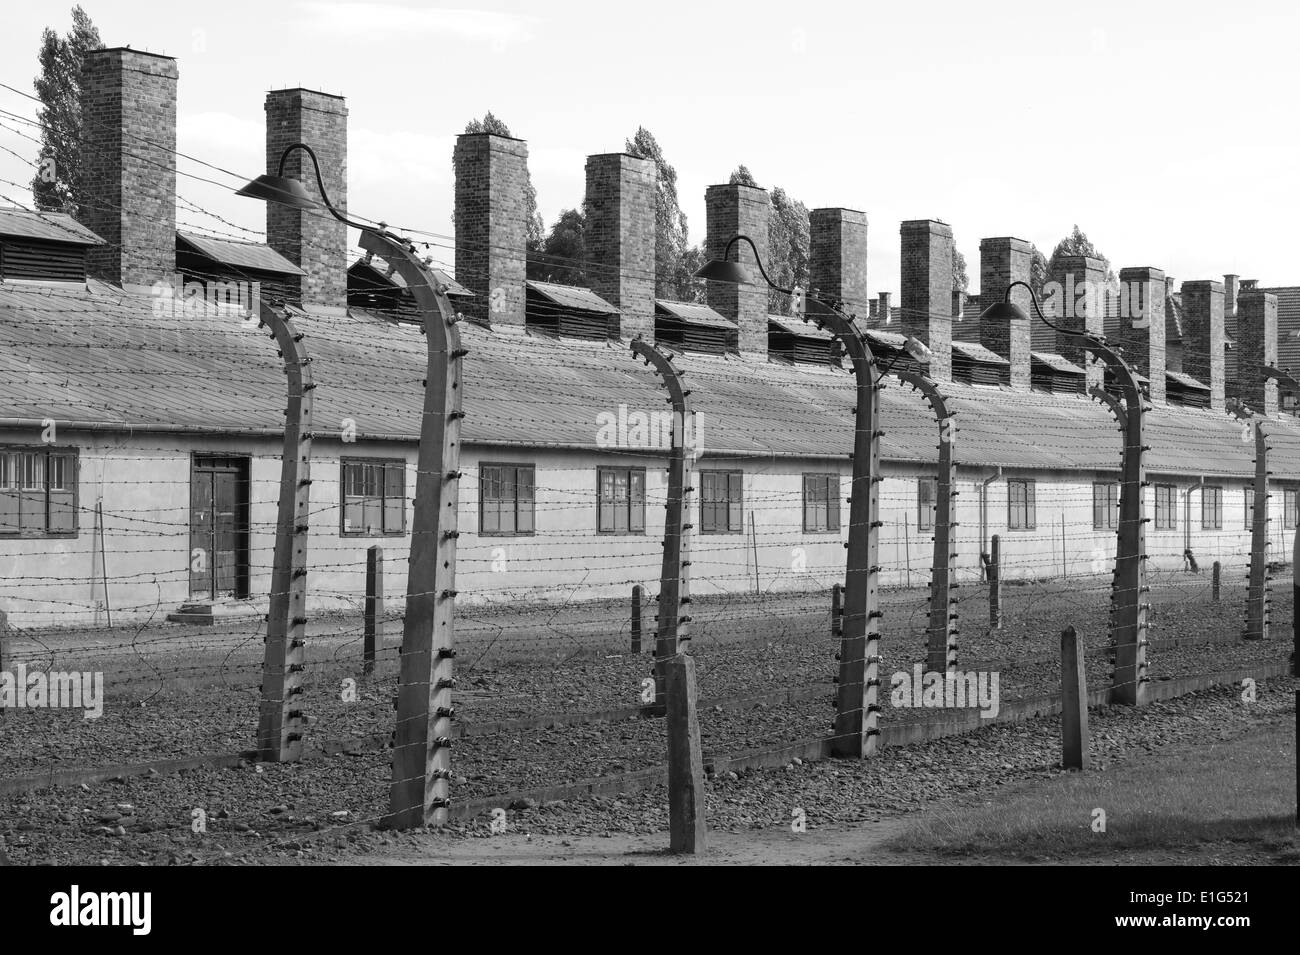 Barracks at Auschwitz concentration camp, Poland Stock Photo